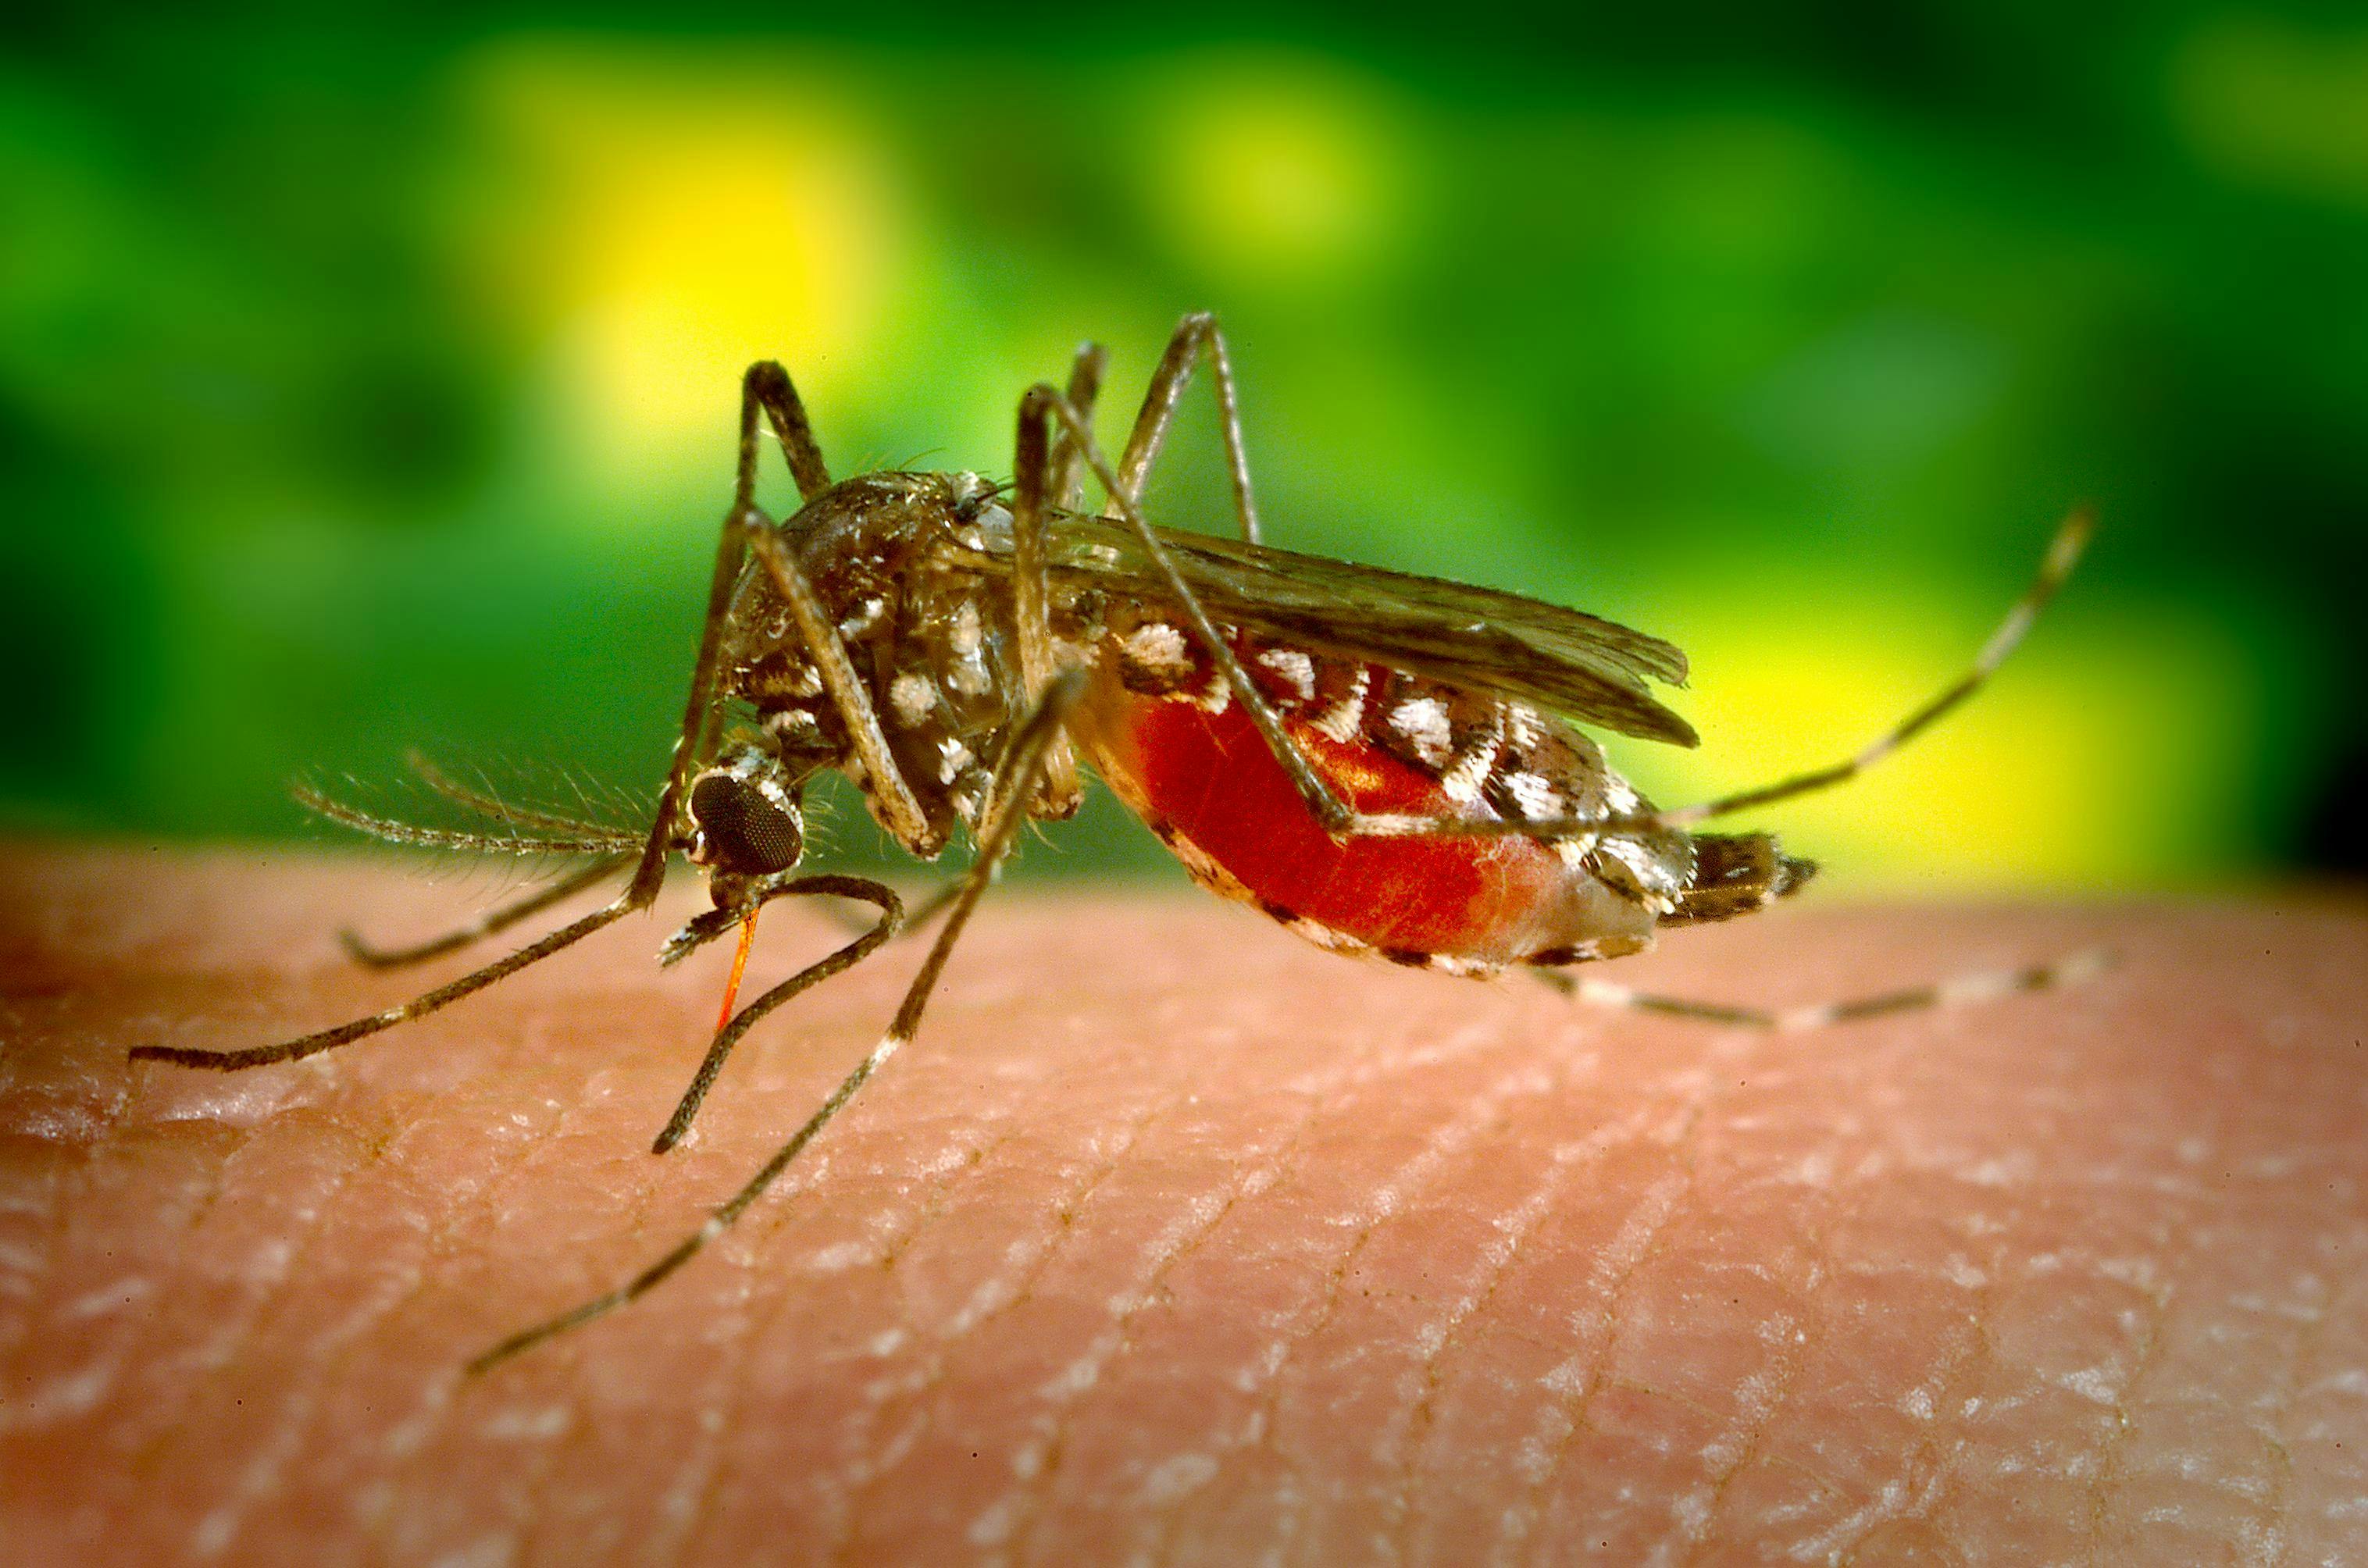 This is a female Aedes aegypti mosquito, which is the primary vector for the spread of Dengue fever. The virus that causes Dengue is maintained in the mosquito’s life cycle, and involves humans, to whom the virus is transmitted when bitten. The female mosquito pictured here, was shown as she was obtaining a blood meal, by inserting the feeding stylet through the skin, and into a blood vessel. Blood can be seen being drawn up through the red colored stylet, and into the mosquito’s mouth.

Photo Credit: James Gathany